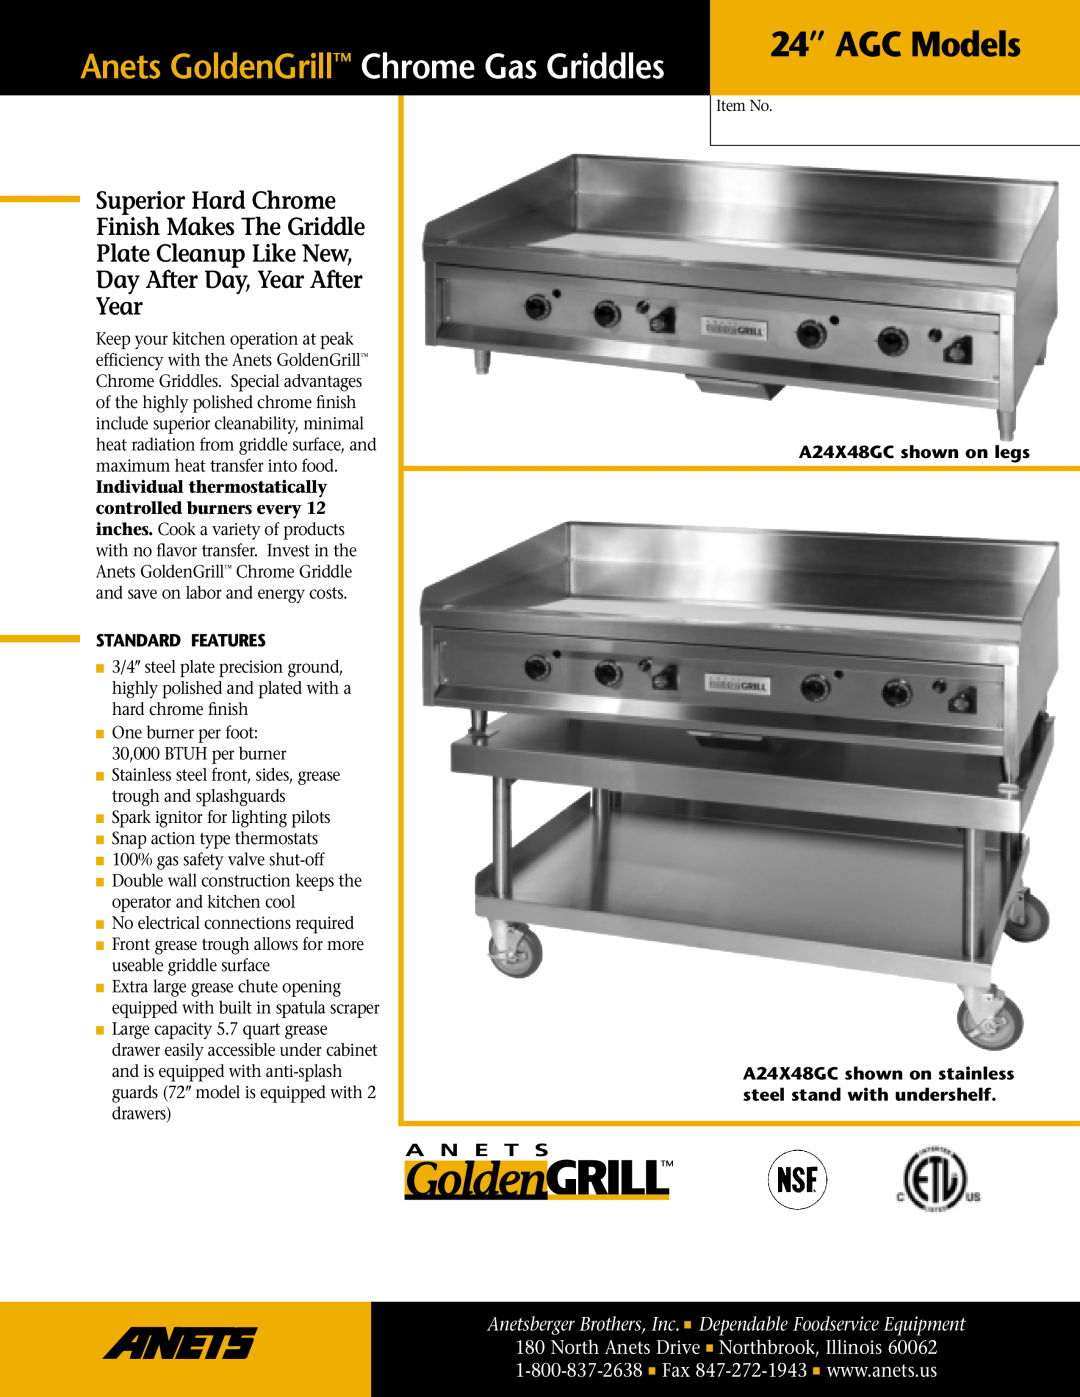 Anetsberger Brothers A24X48GC manual 24” AGC Models, Anets GoldenGrill Chrome Gas Griddles, Standard Features, Year 